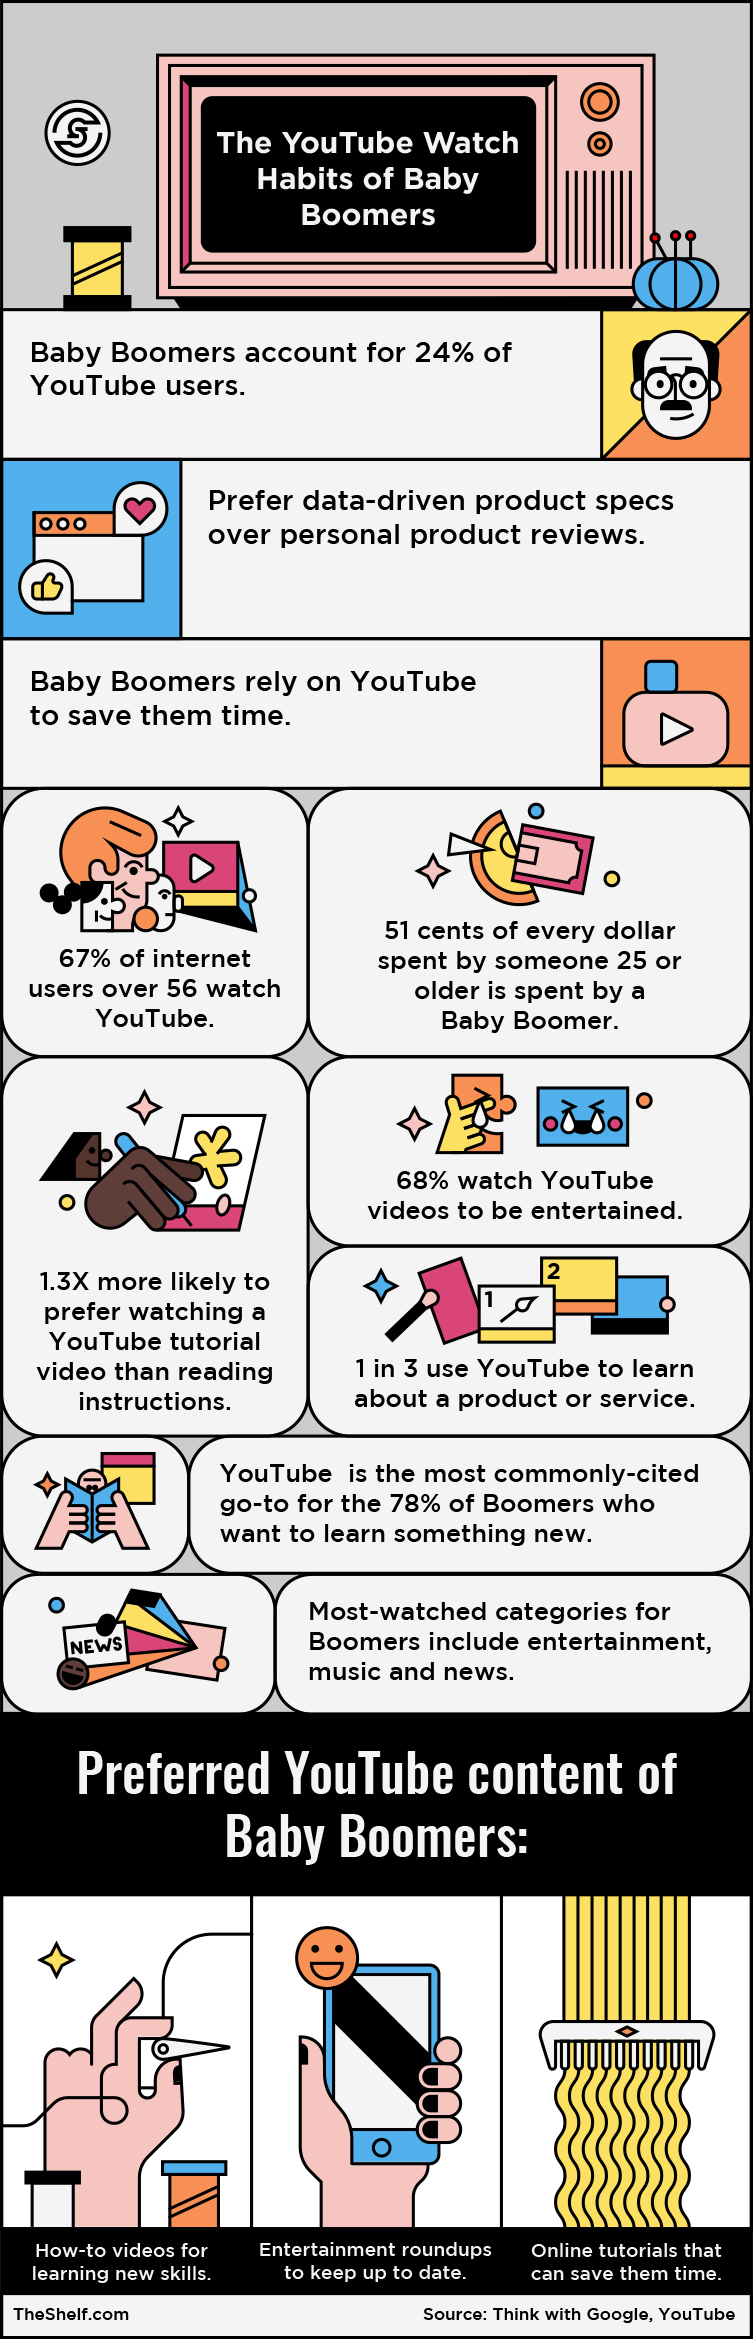  Infographic image on YouTube watch habits of Baby Boomers.